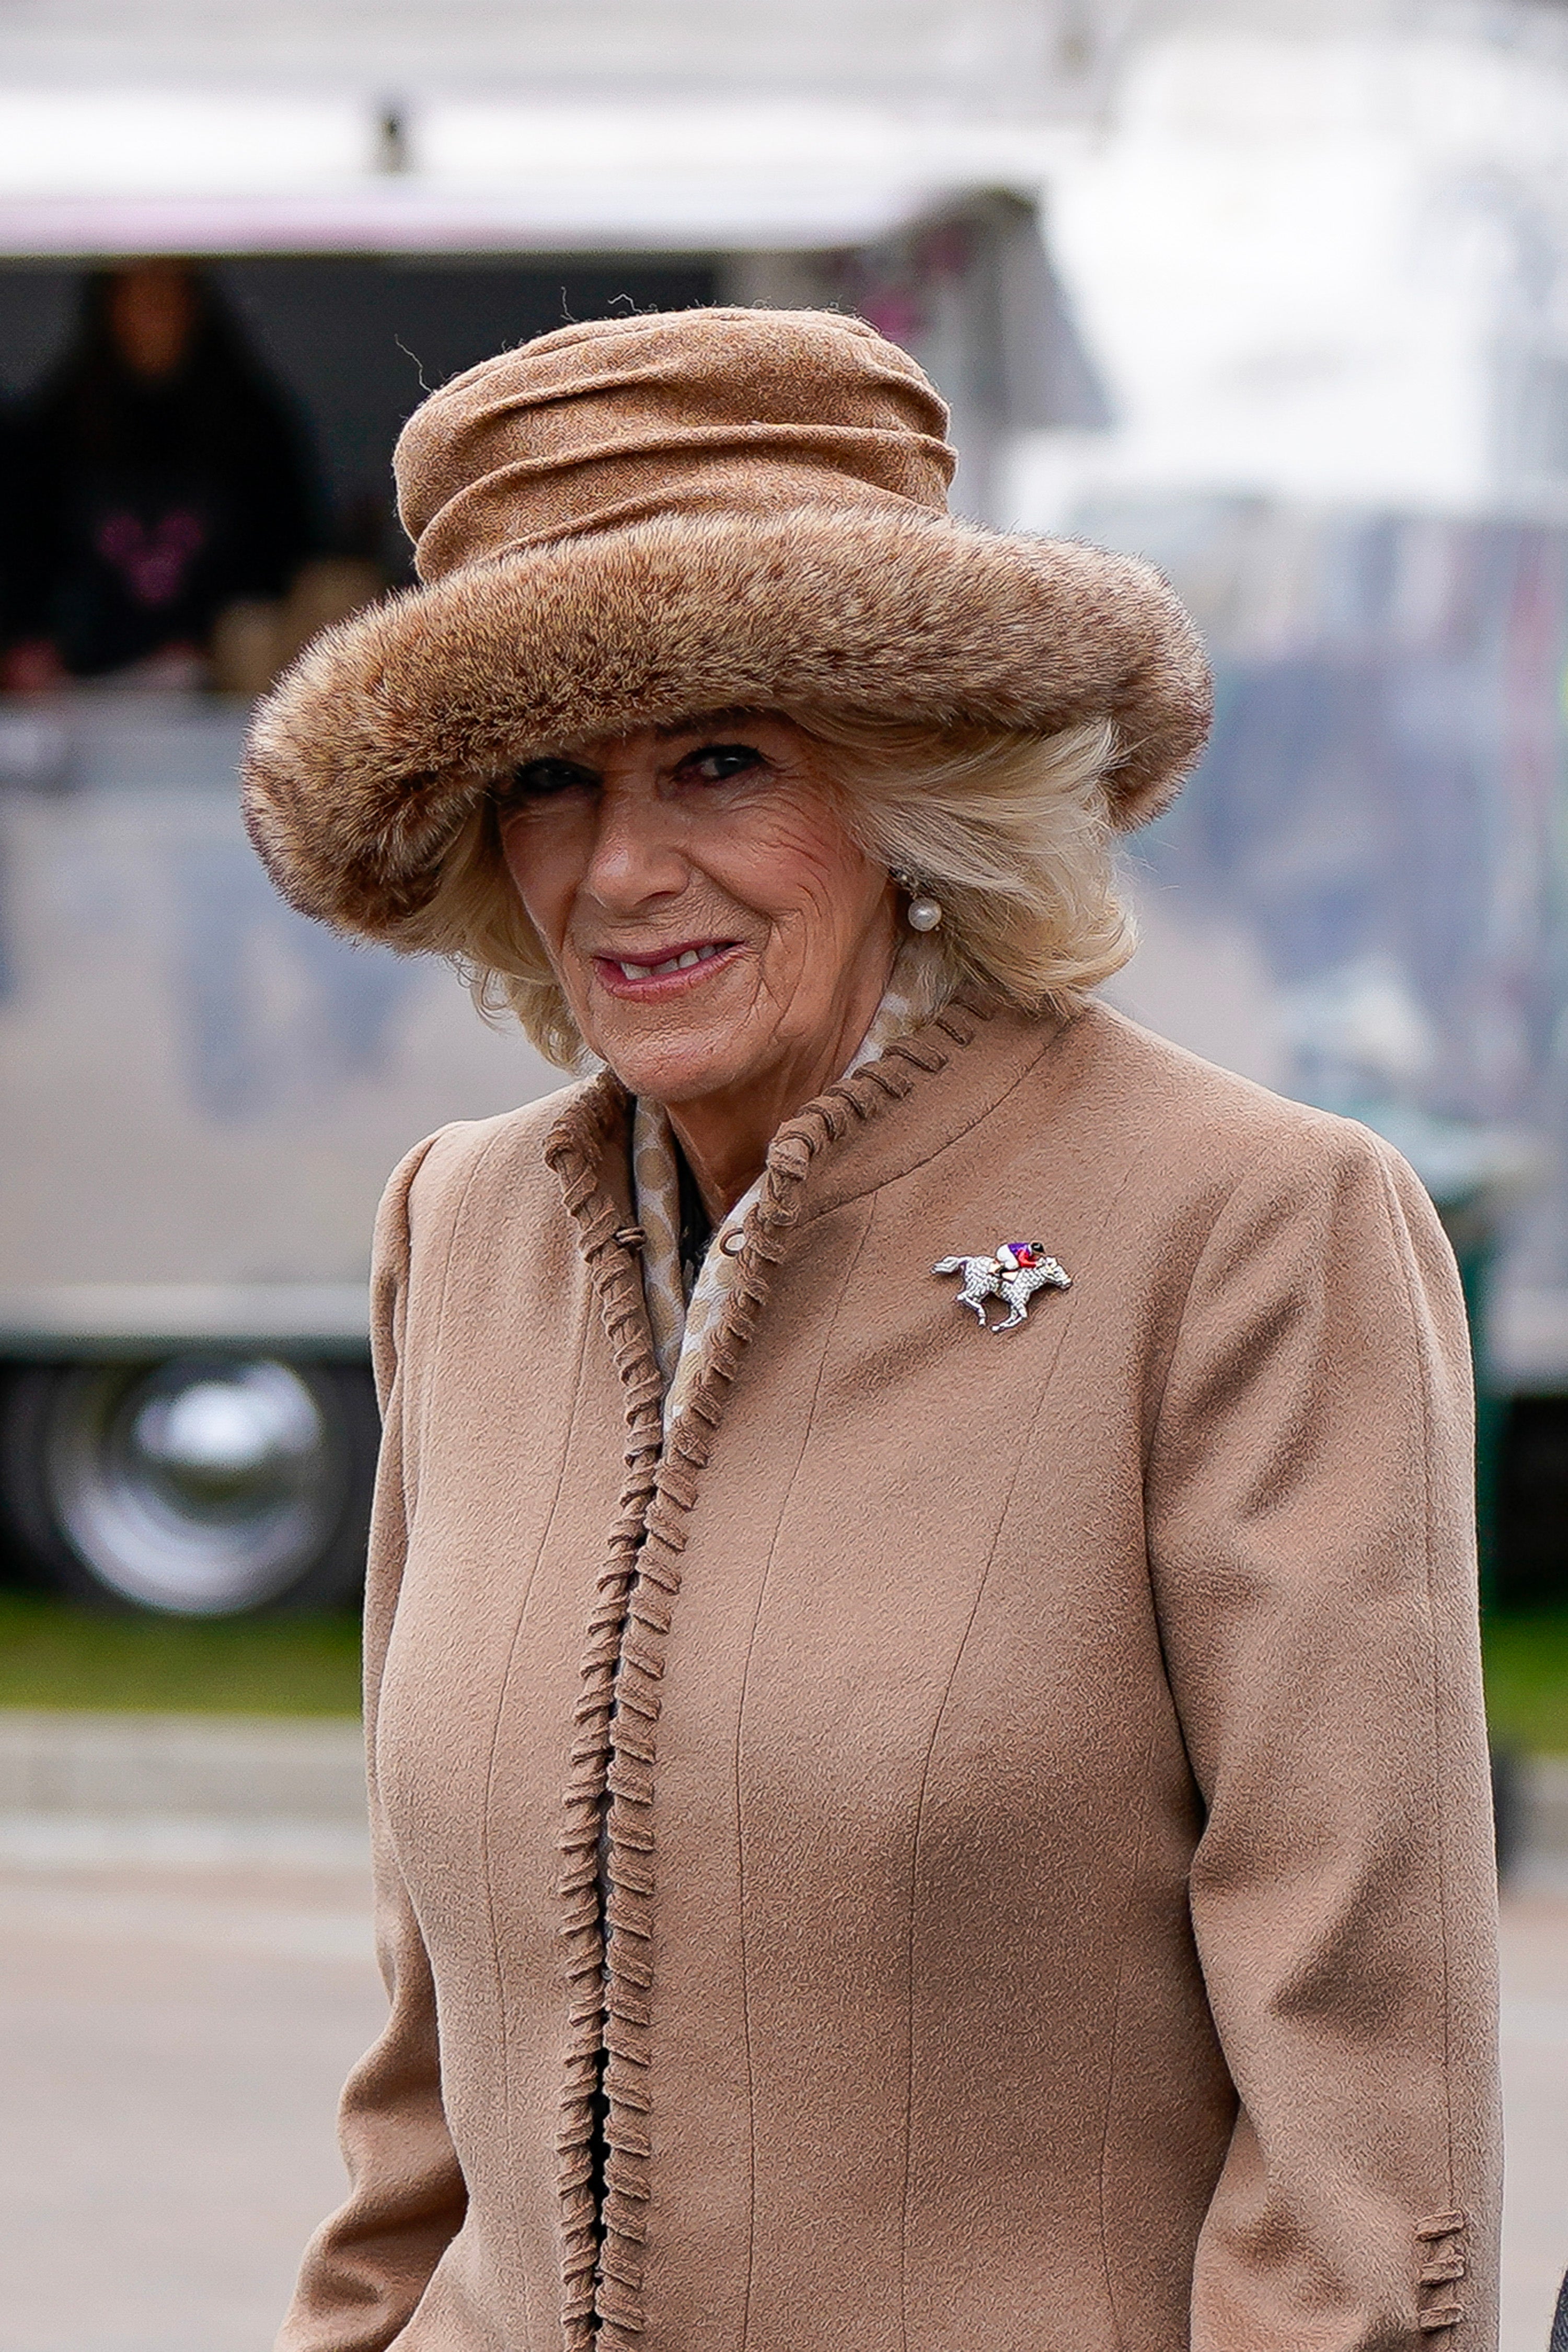 Camilla Queen Consort arrived at the racing event wearing camel-coloured ensemble